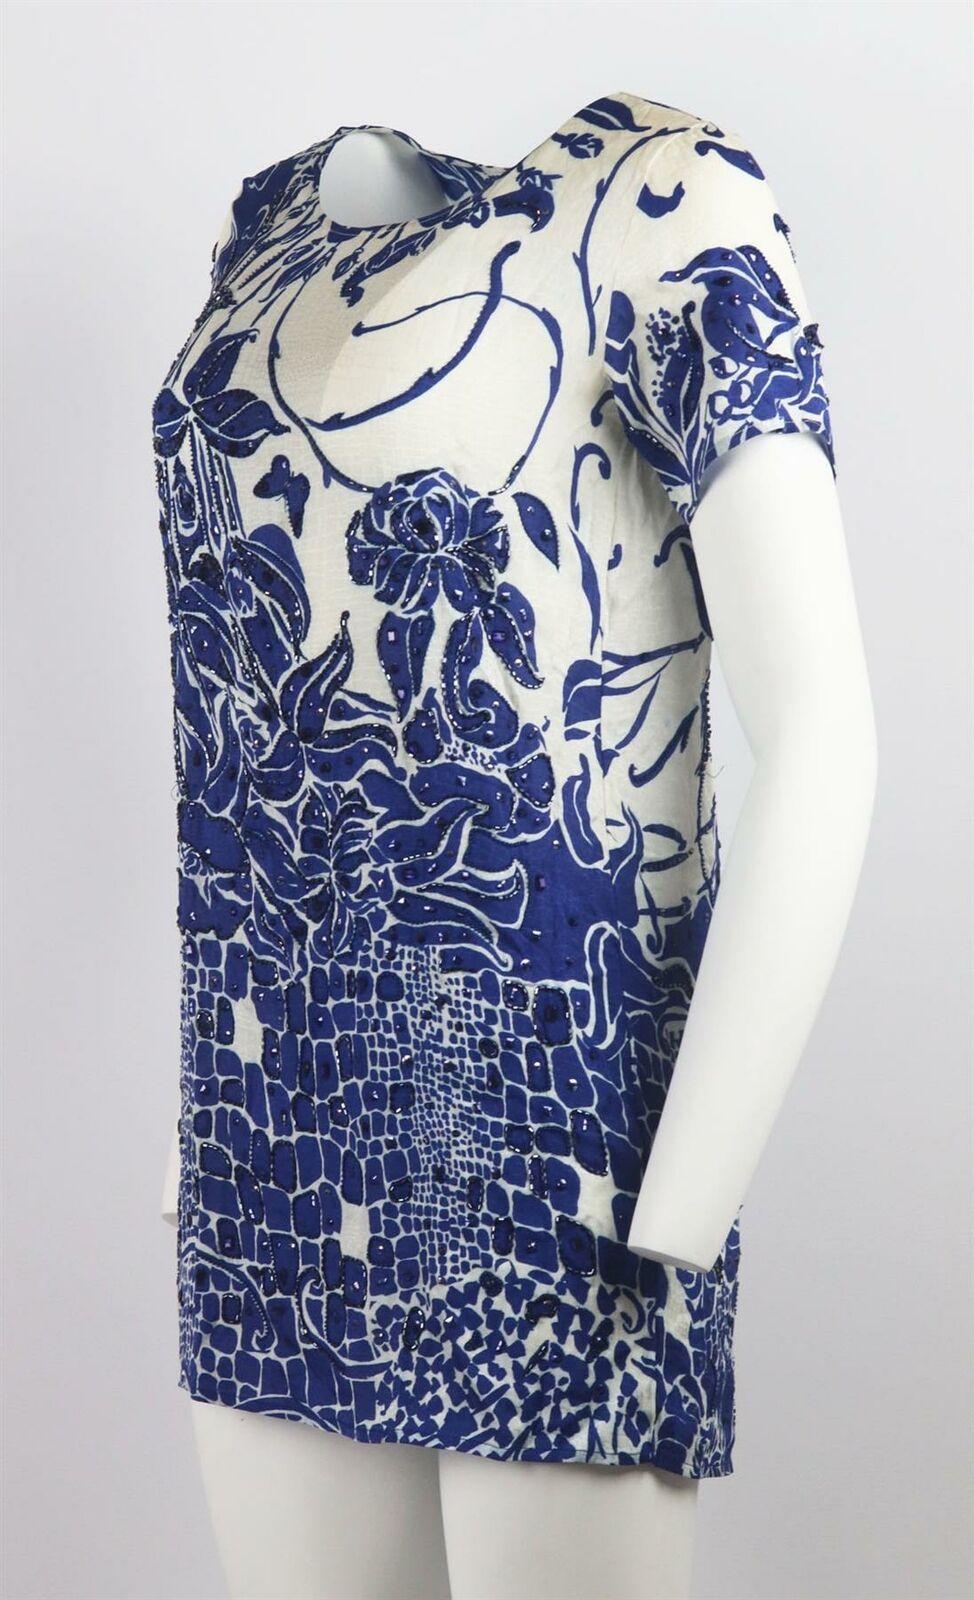 This dress by Emilio Pucci is filled with delicate, lingerie-inspired designs, it has been made in Italy from bead embellished floral-printed silk and cut for a short sleeve mini silhouette.
Ecru and blue silk.
Slips on.
100% Silk.

Size: IT 38 (UK